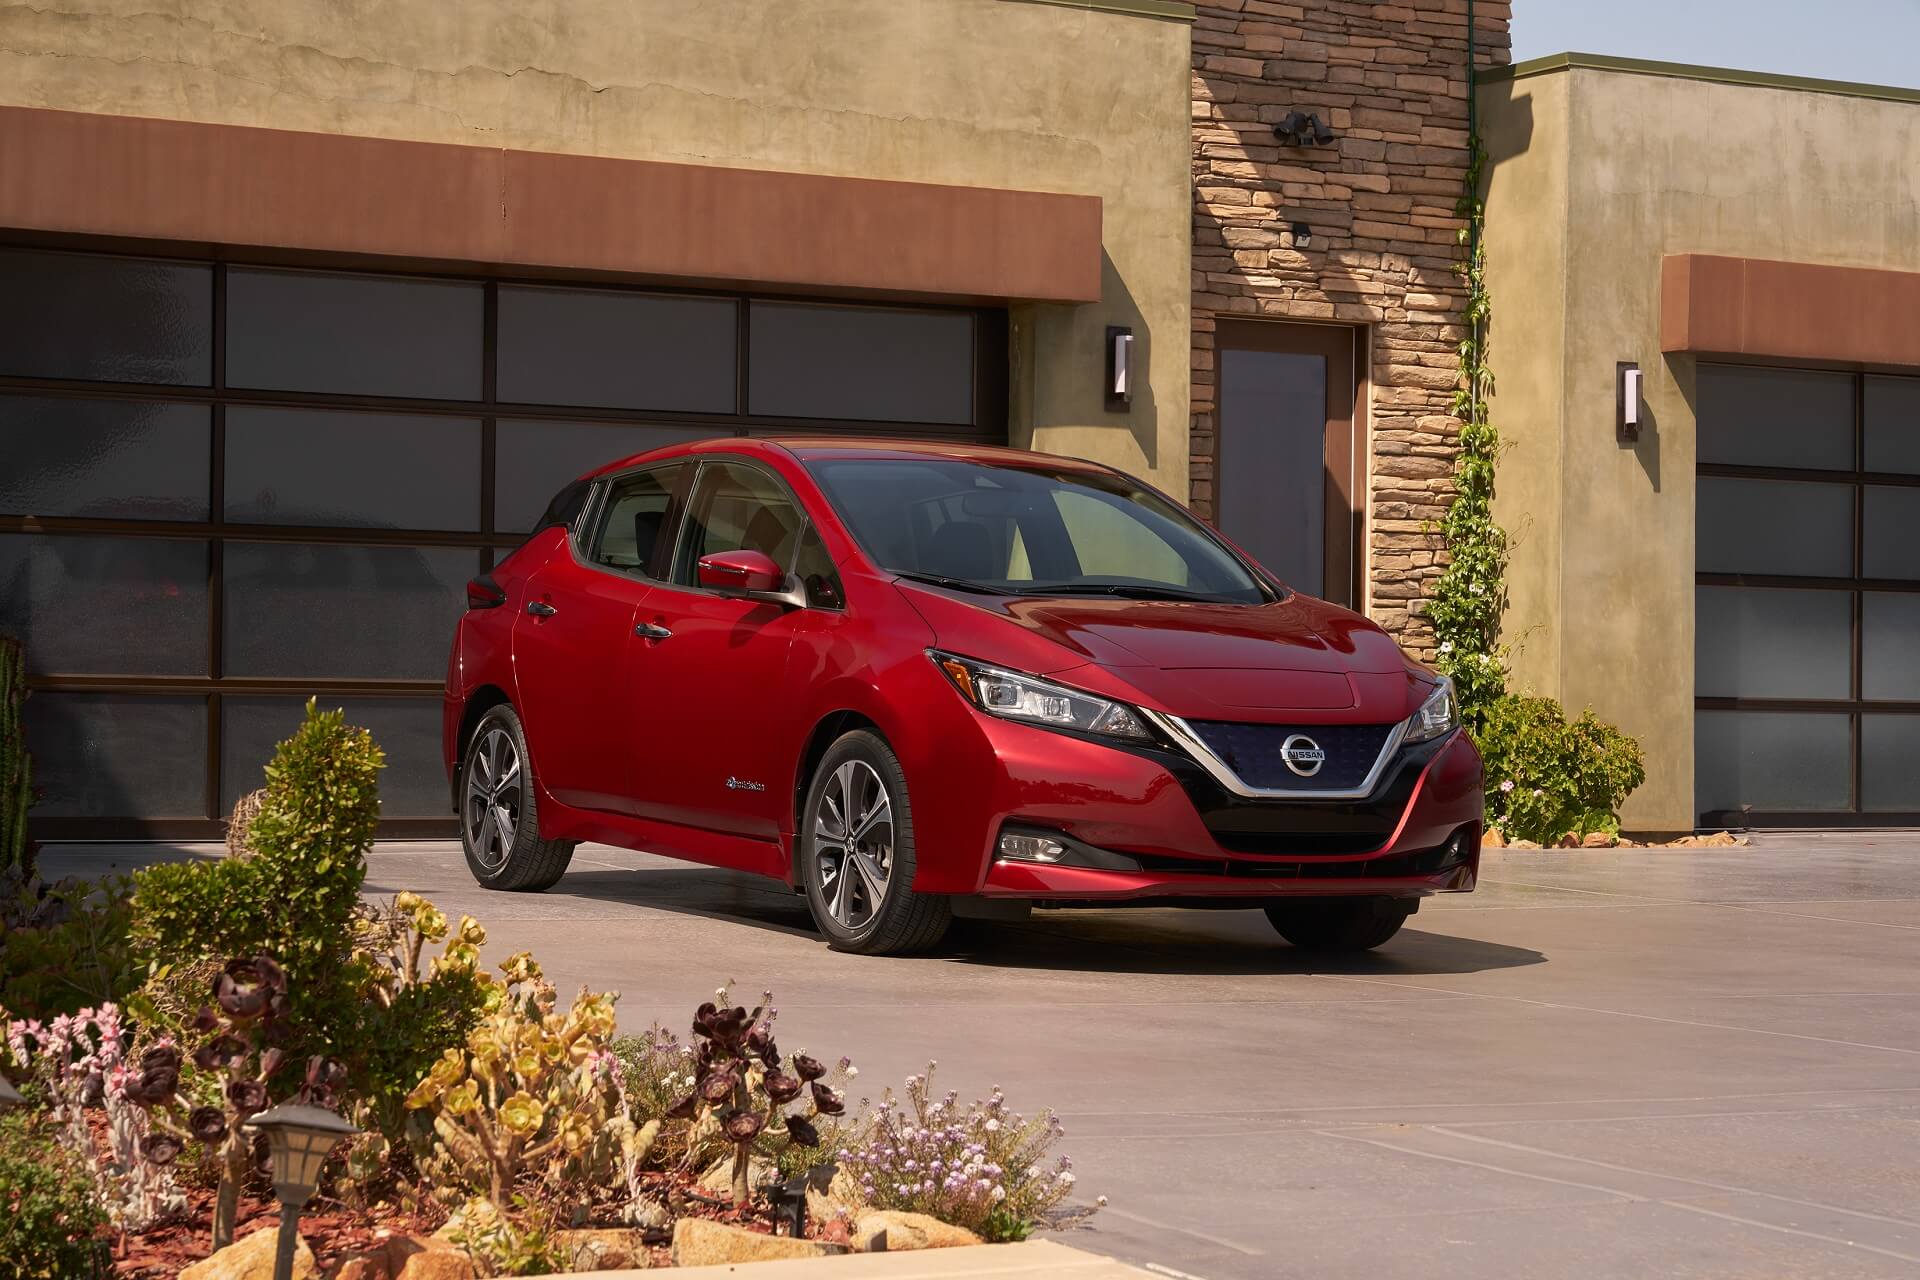 https://e-vehicleinfo.com/nissan-leaf-2022-price-range-and-review/